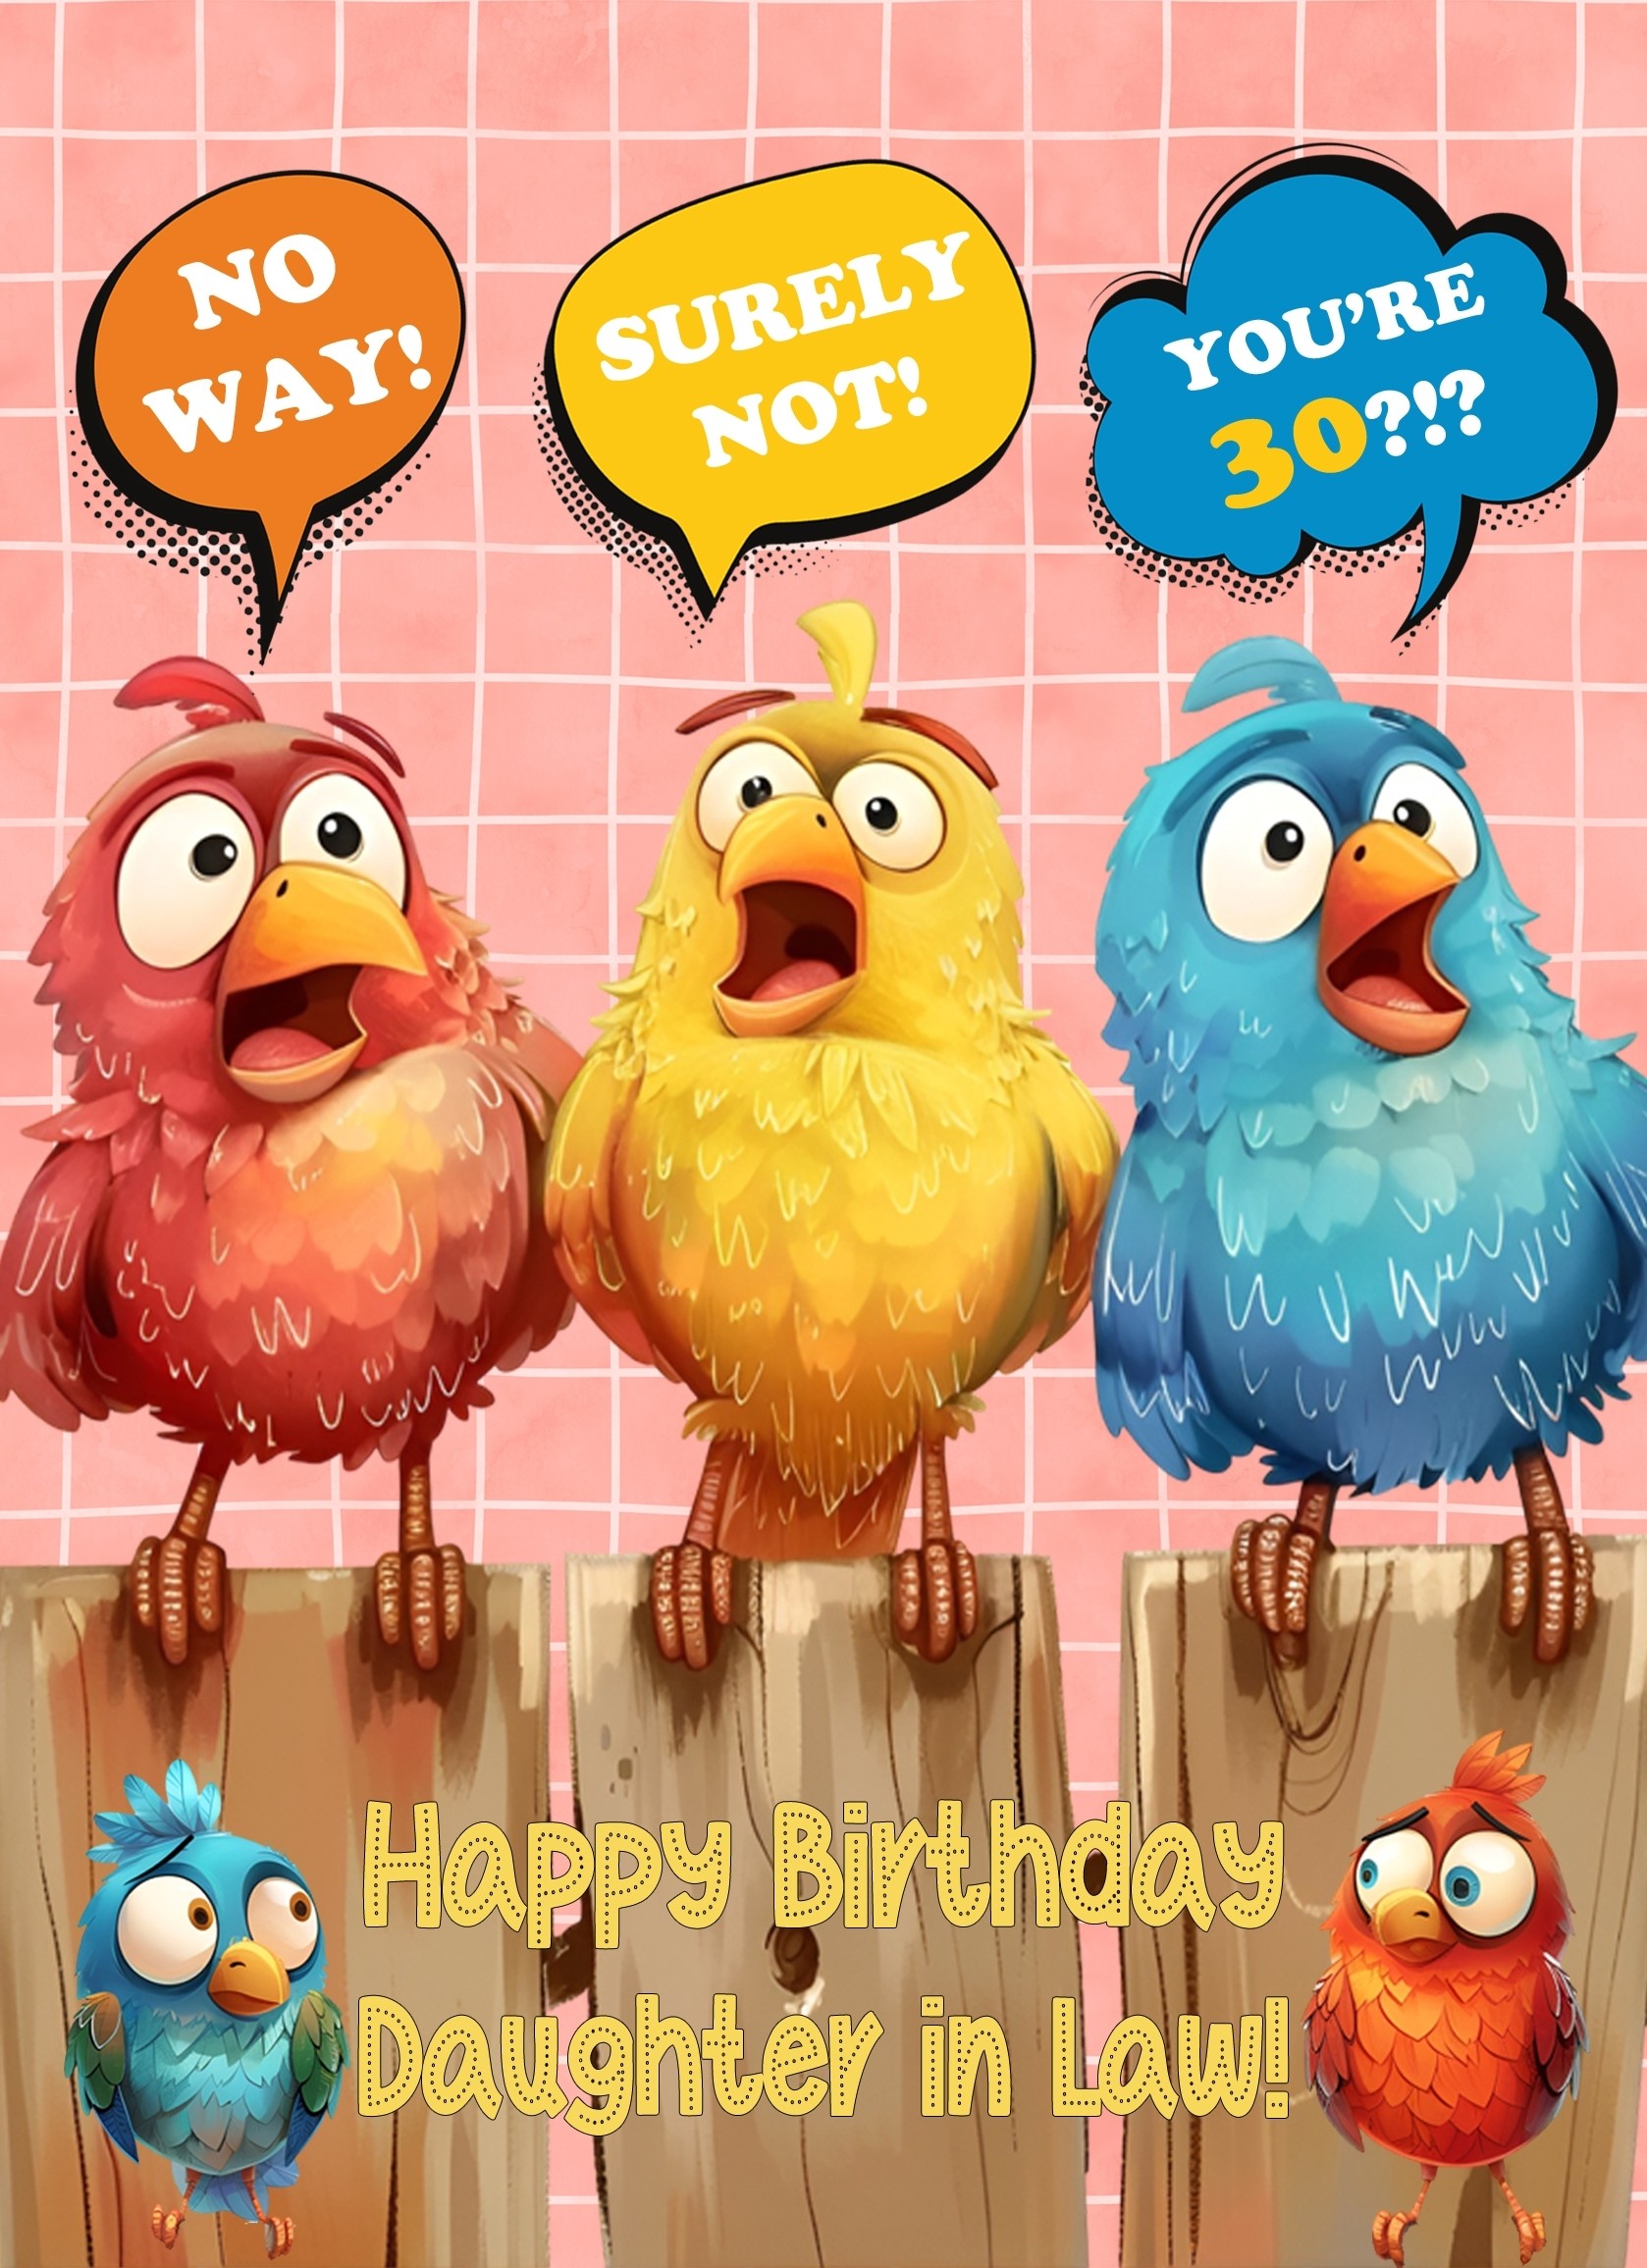 Daughter in Law 30th Birthday Card (Funny Birds Surprised)